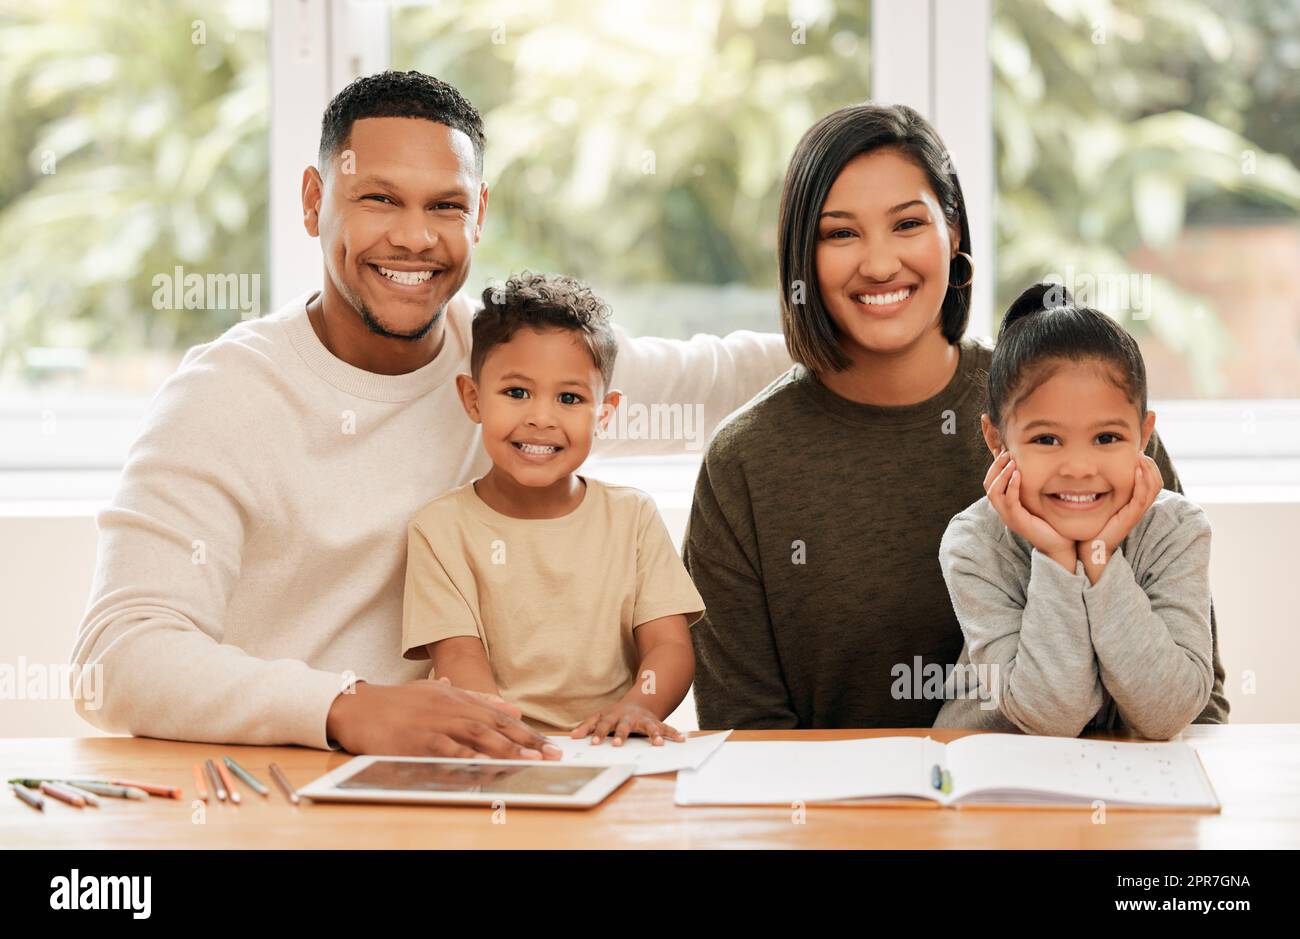 Learning together. Shot of a young family doing homework together at home. Stock Photo